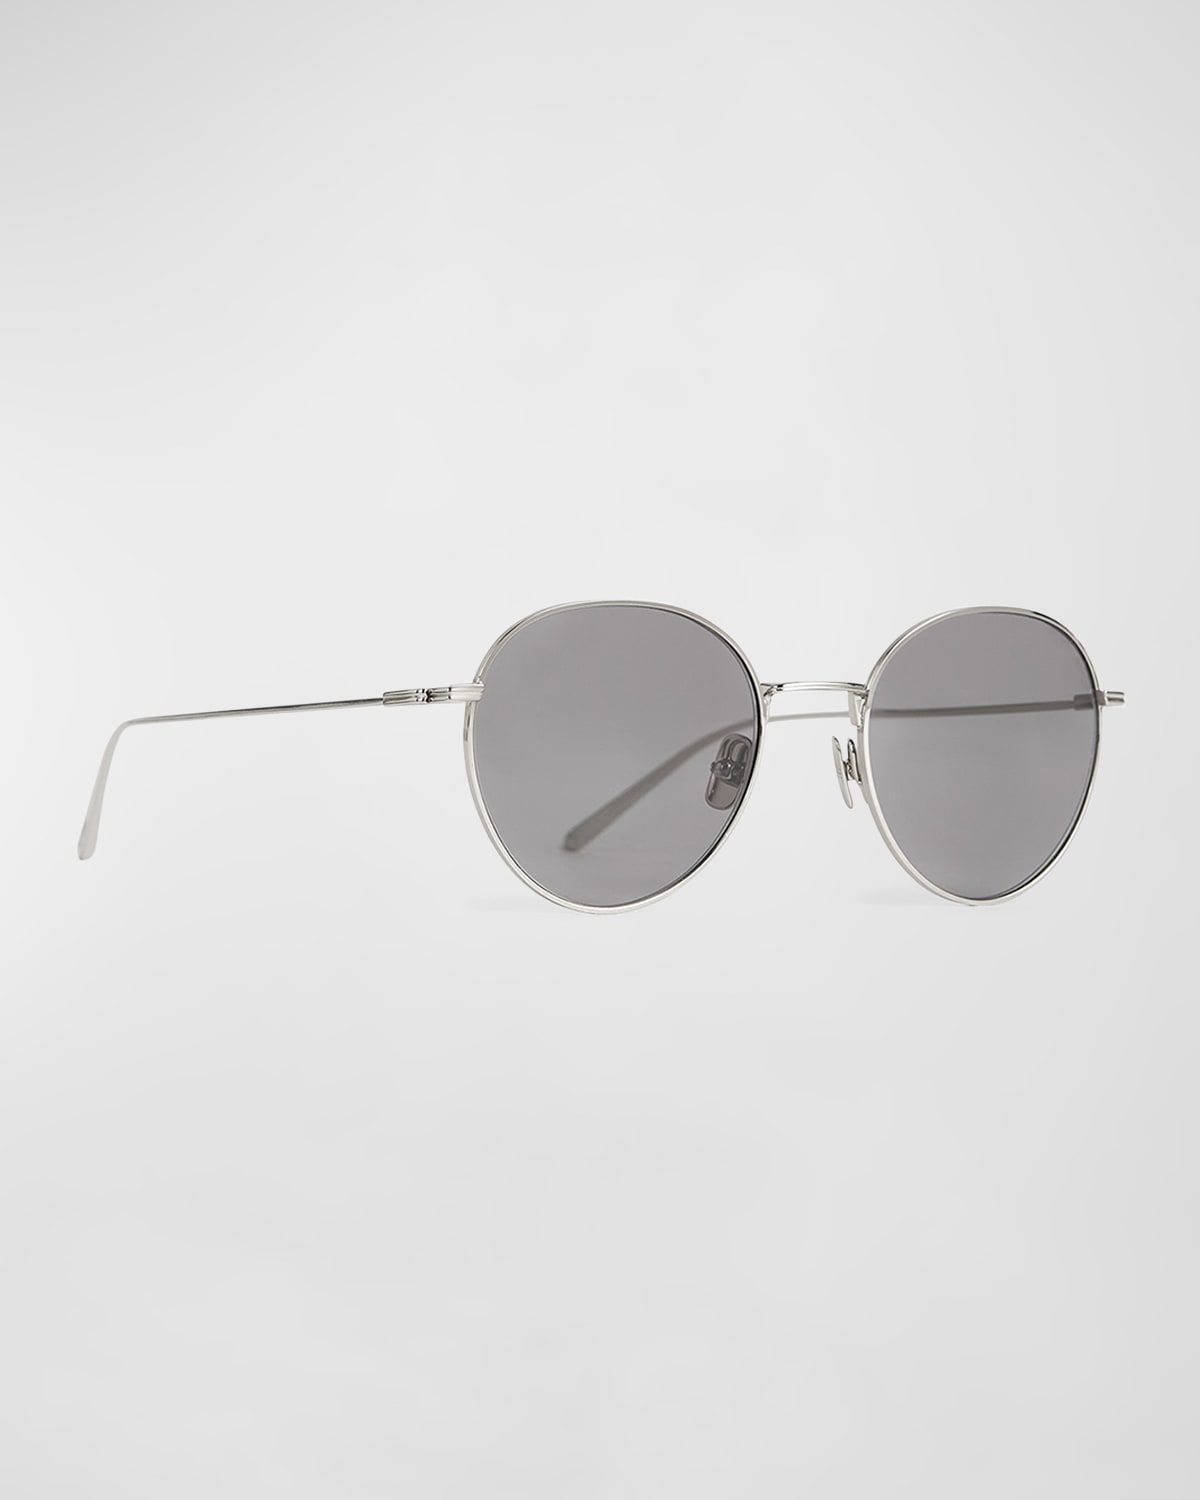 The Rounds Stainless Steel Round Sunglasses